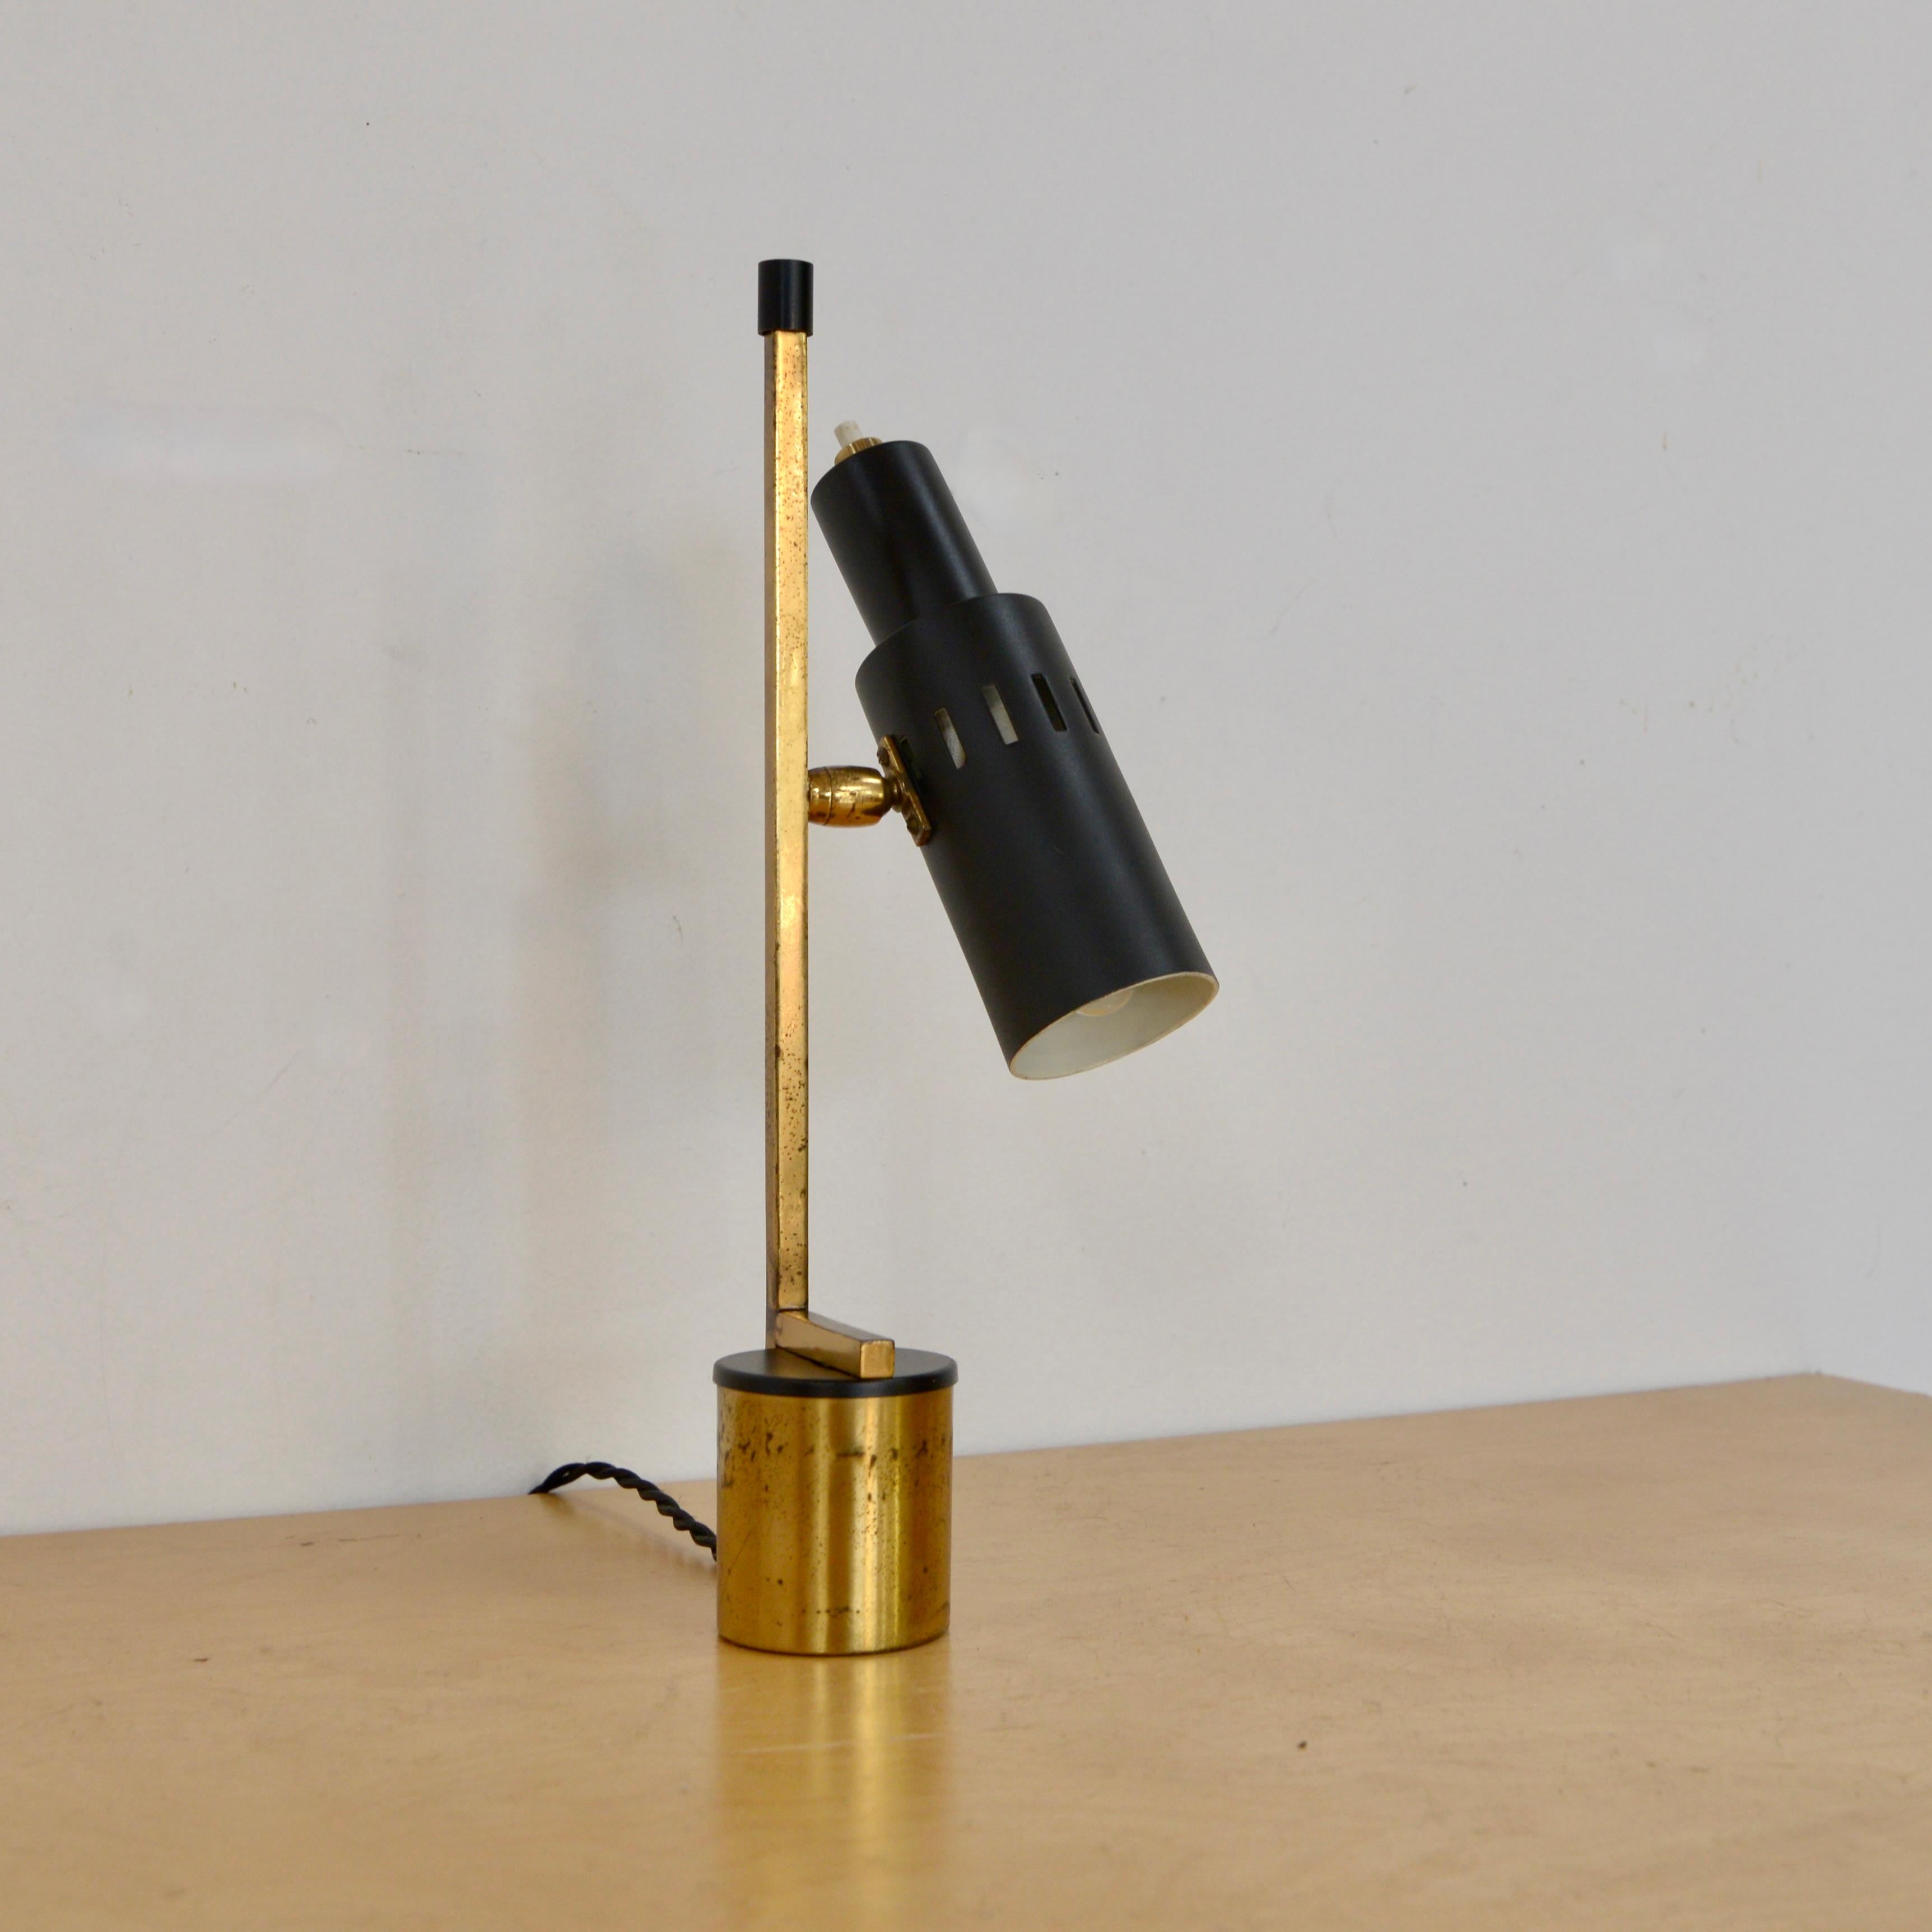 Fantastic petite Mid-Century Modern table lamp from Italy. Naturally aged brass. Restored and rewired for use in the US. Single candelabra based socket. Push switch on shade.

Measurements:
Height 11”
Base 2”
Depth 3”.
 